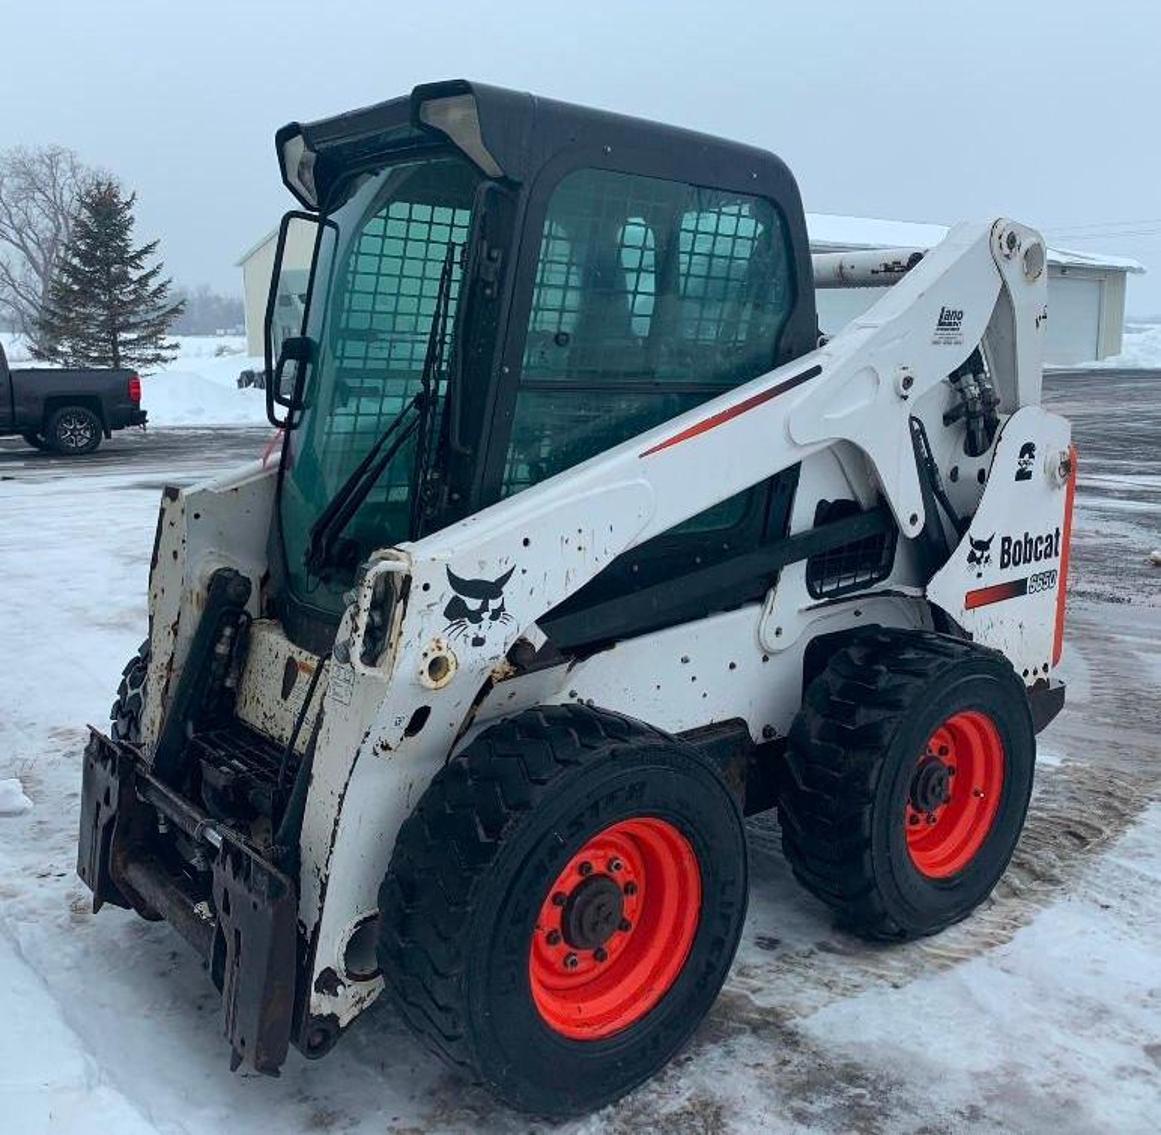 2010 Bobcat S650 Compact Skid Loader With 6' Bucket and 48